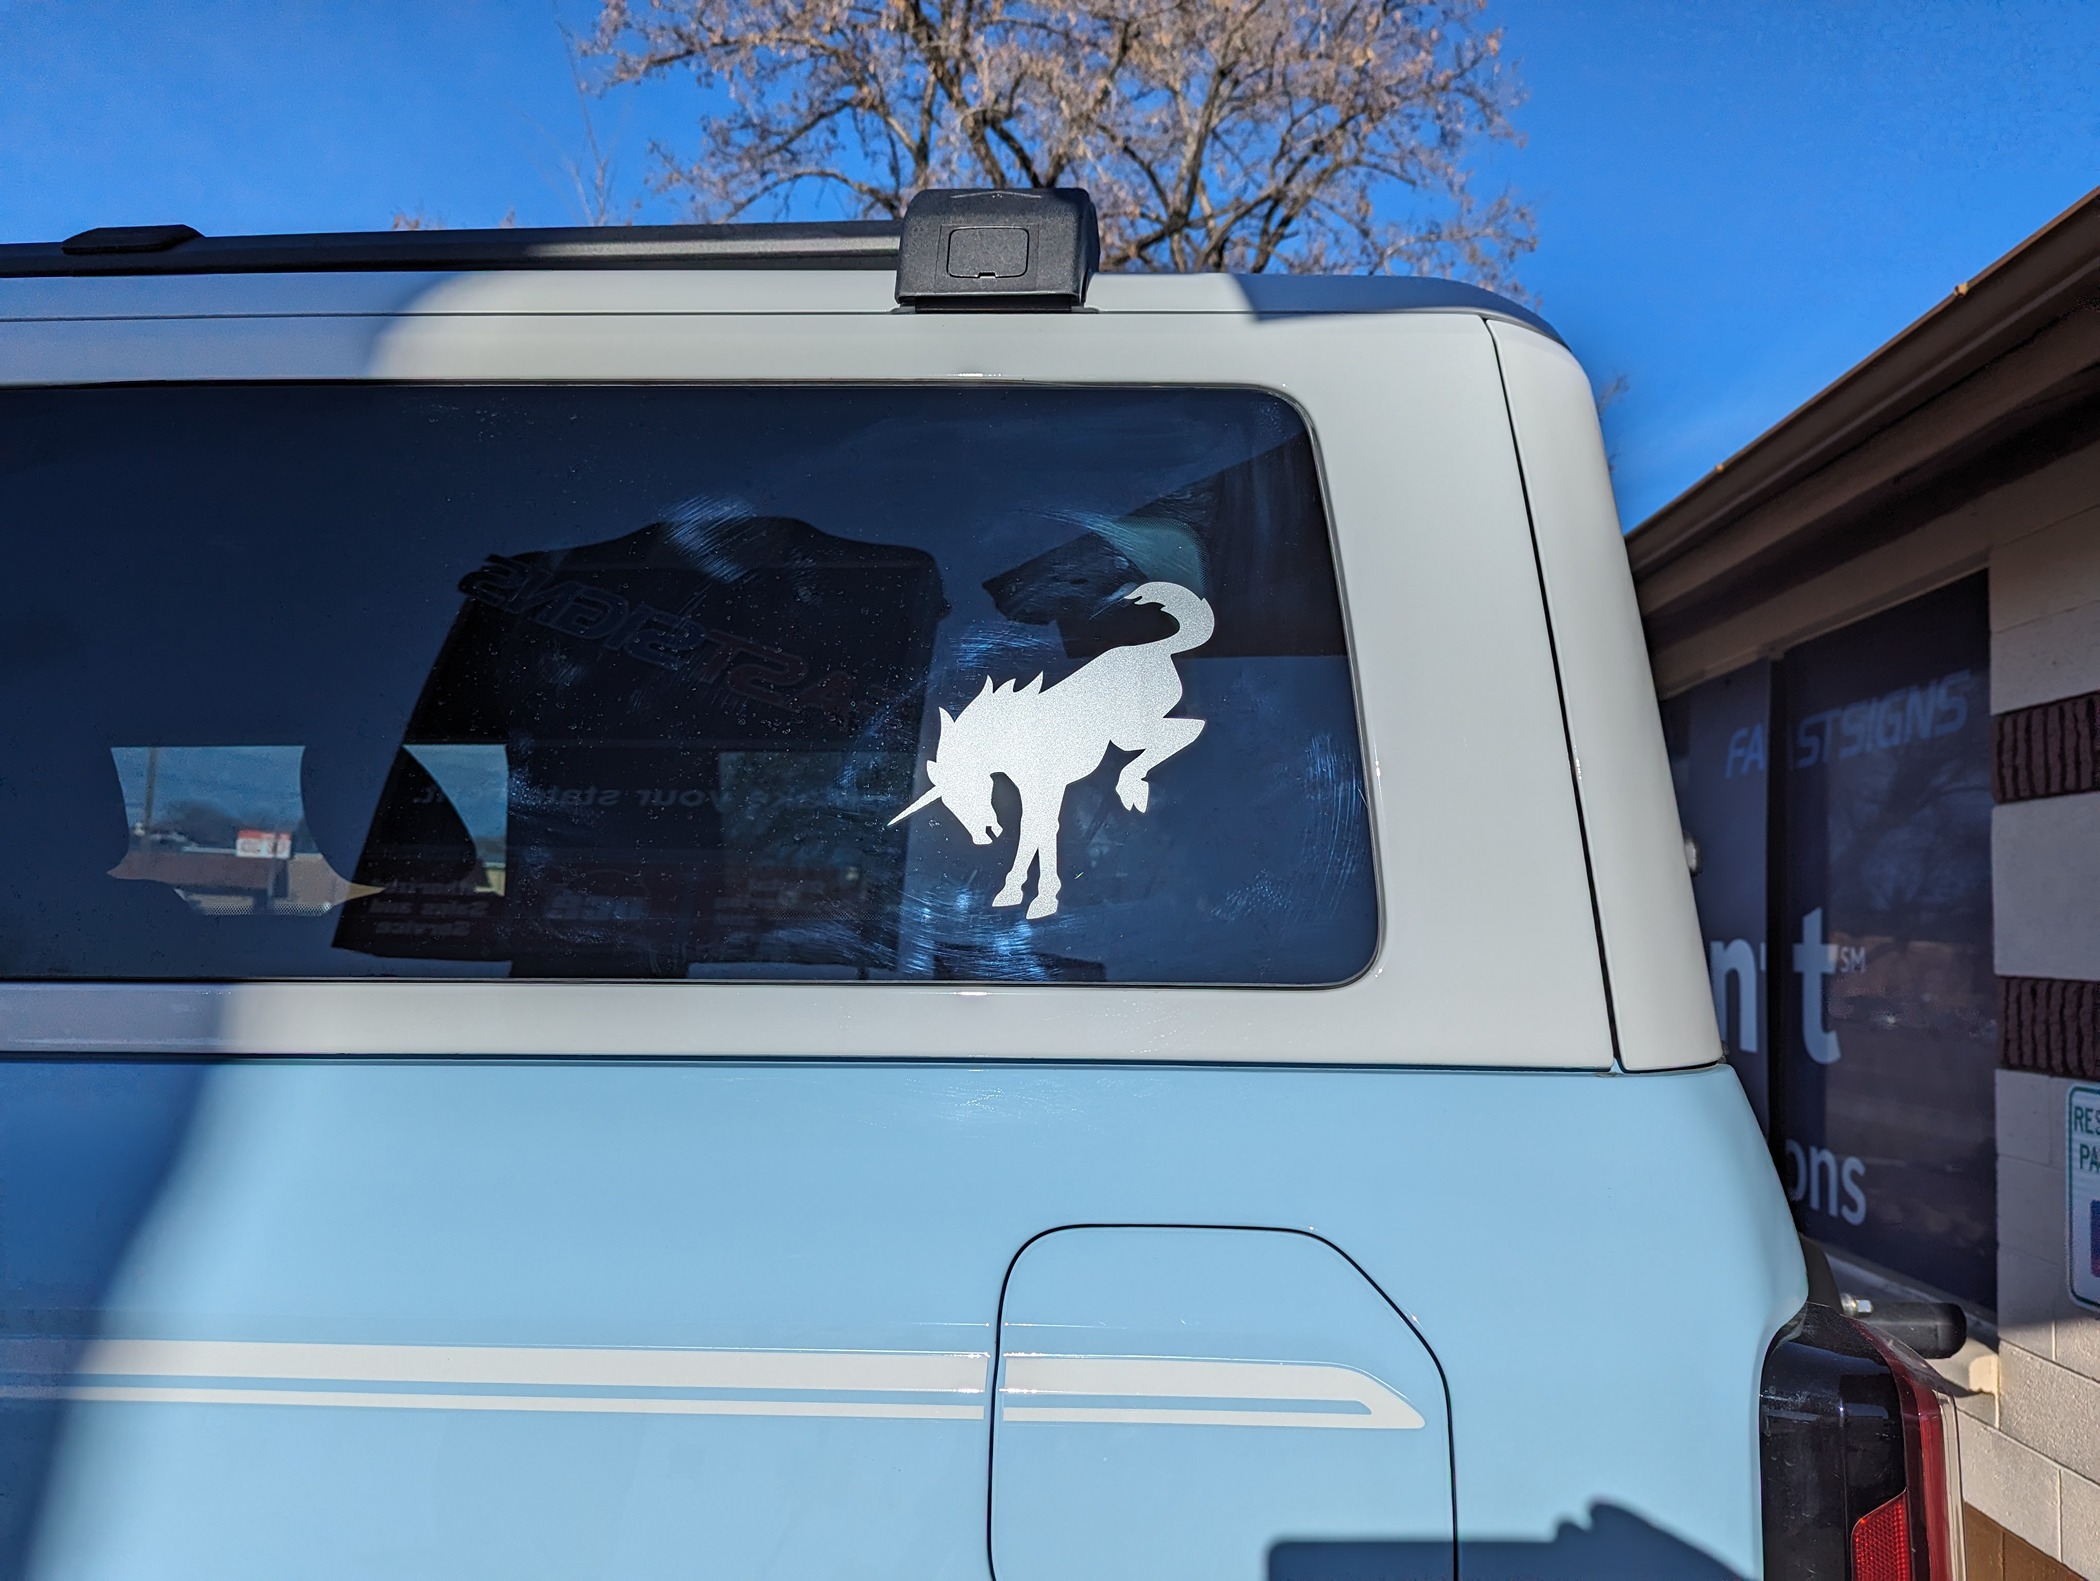 Ford Bronco Have you put Stickers on your Bronco? Let's see them Unicorn 2